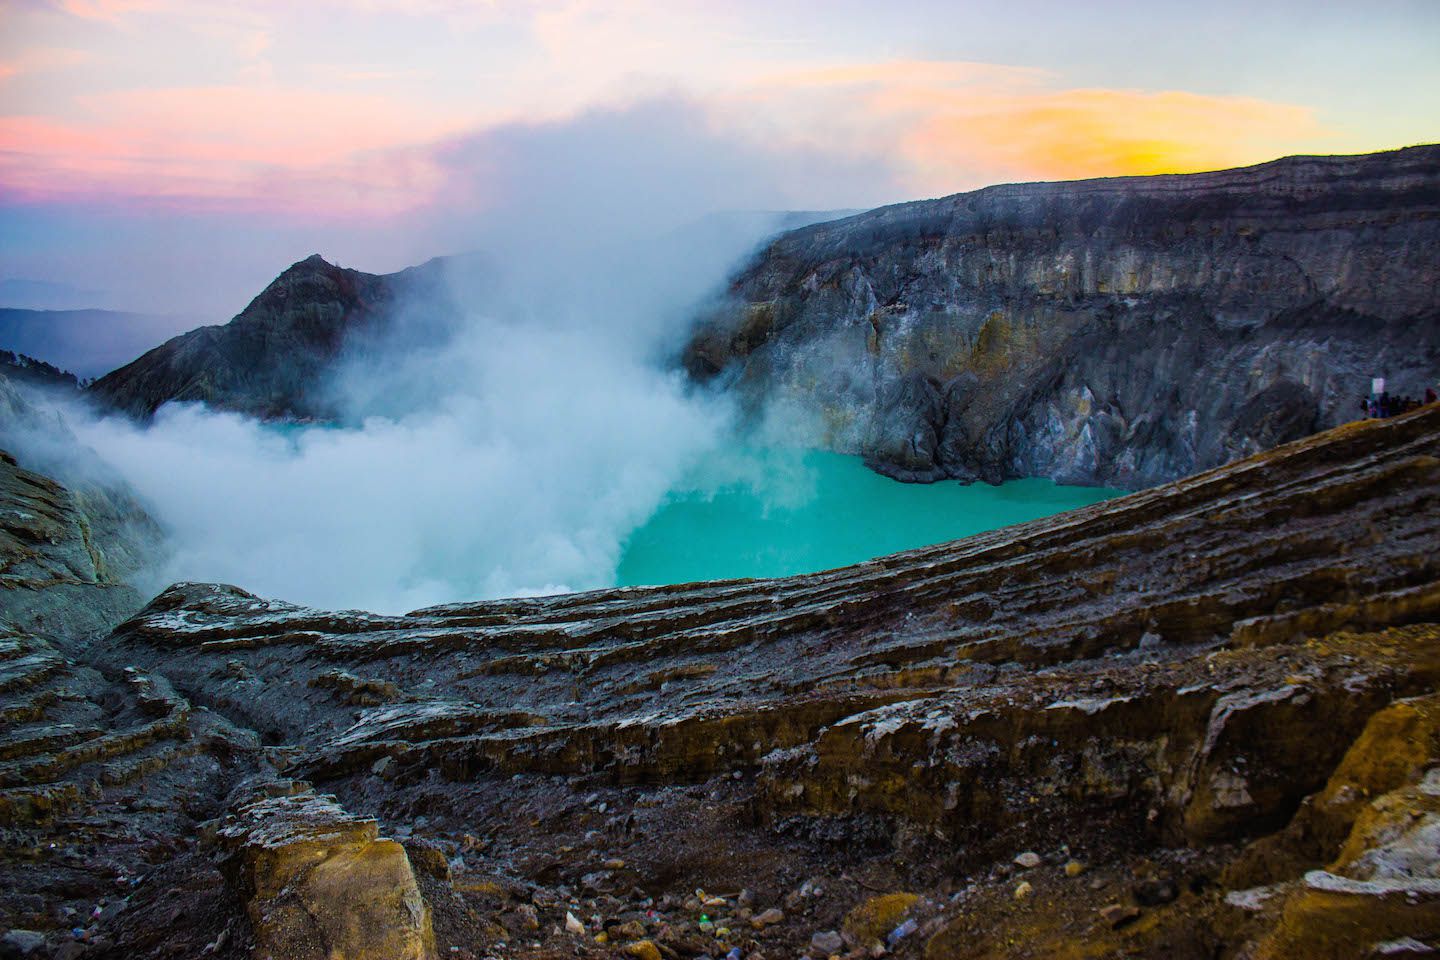 Crater of Mt. Ijen, Indonesia